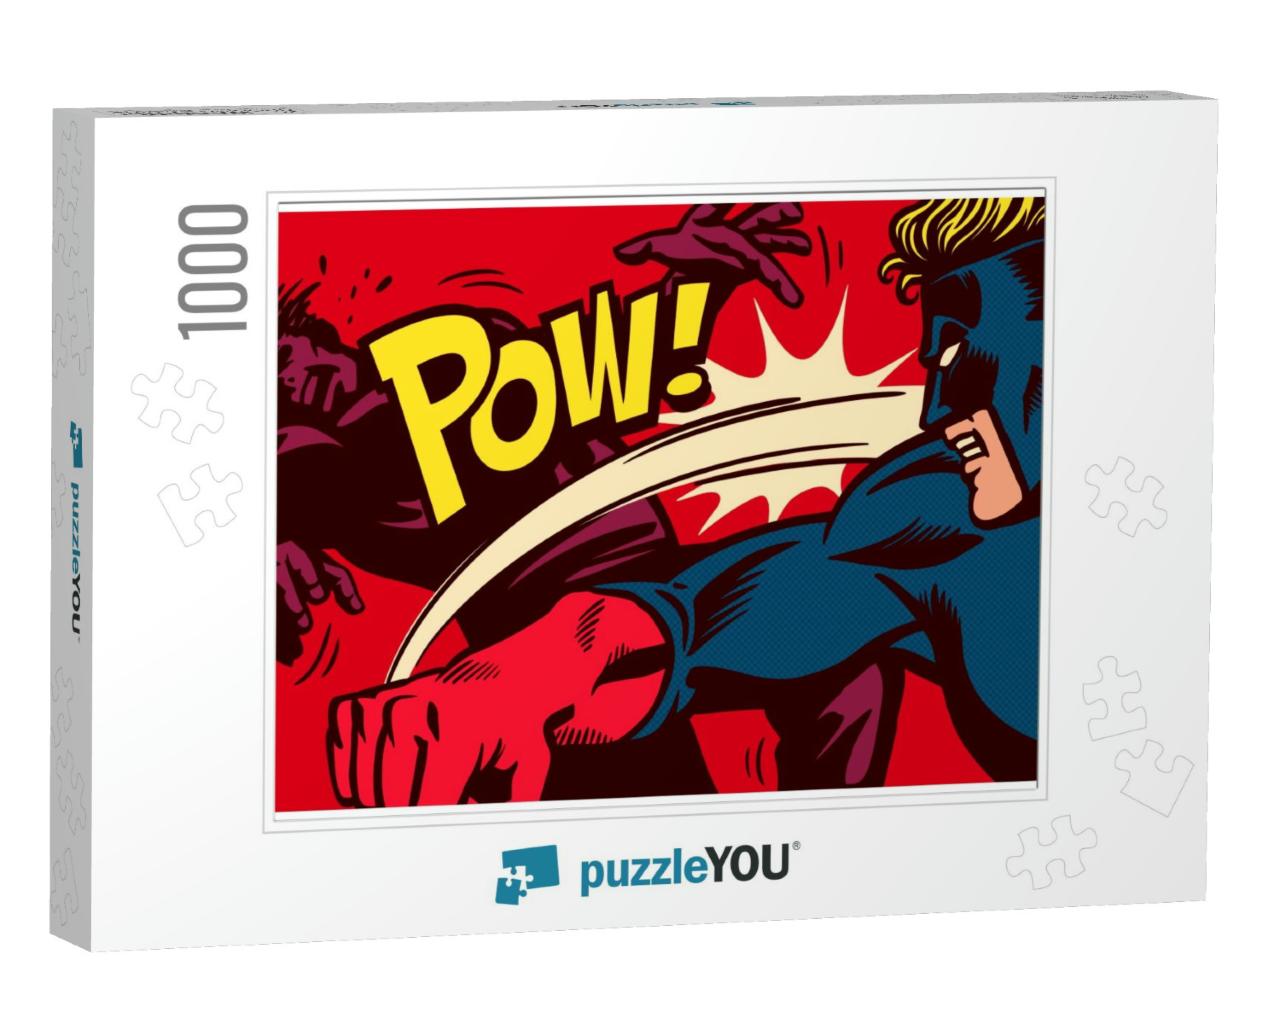 Pop Art Comic Book Style Panel with Superhero Fighting, T... Jigsaw Puzzle with 1000 pieces